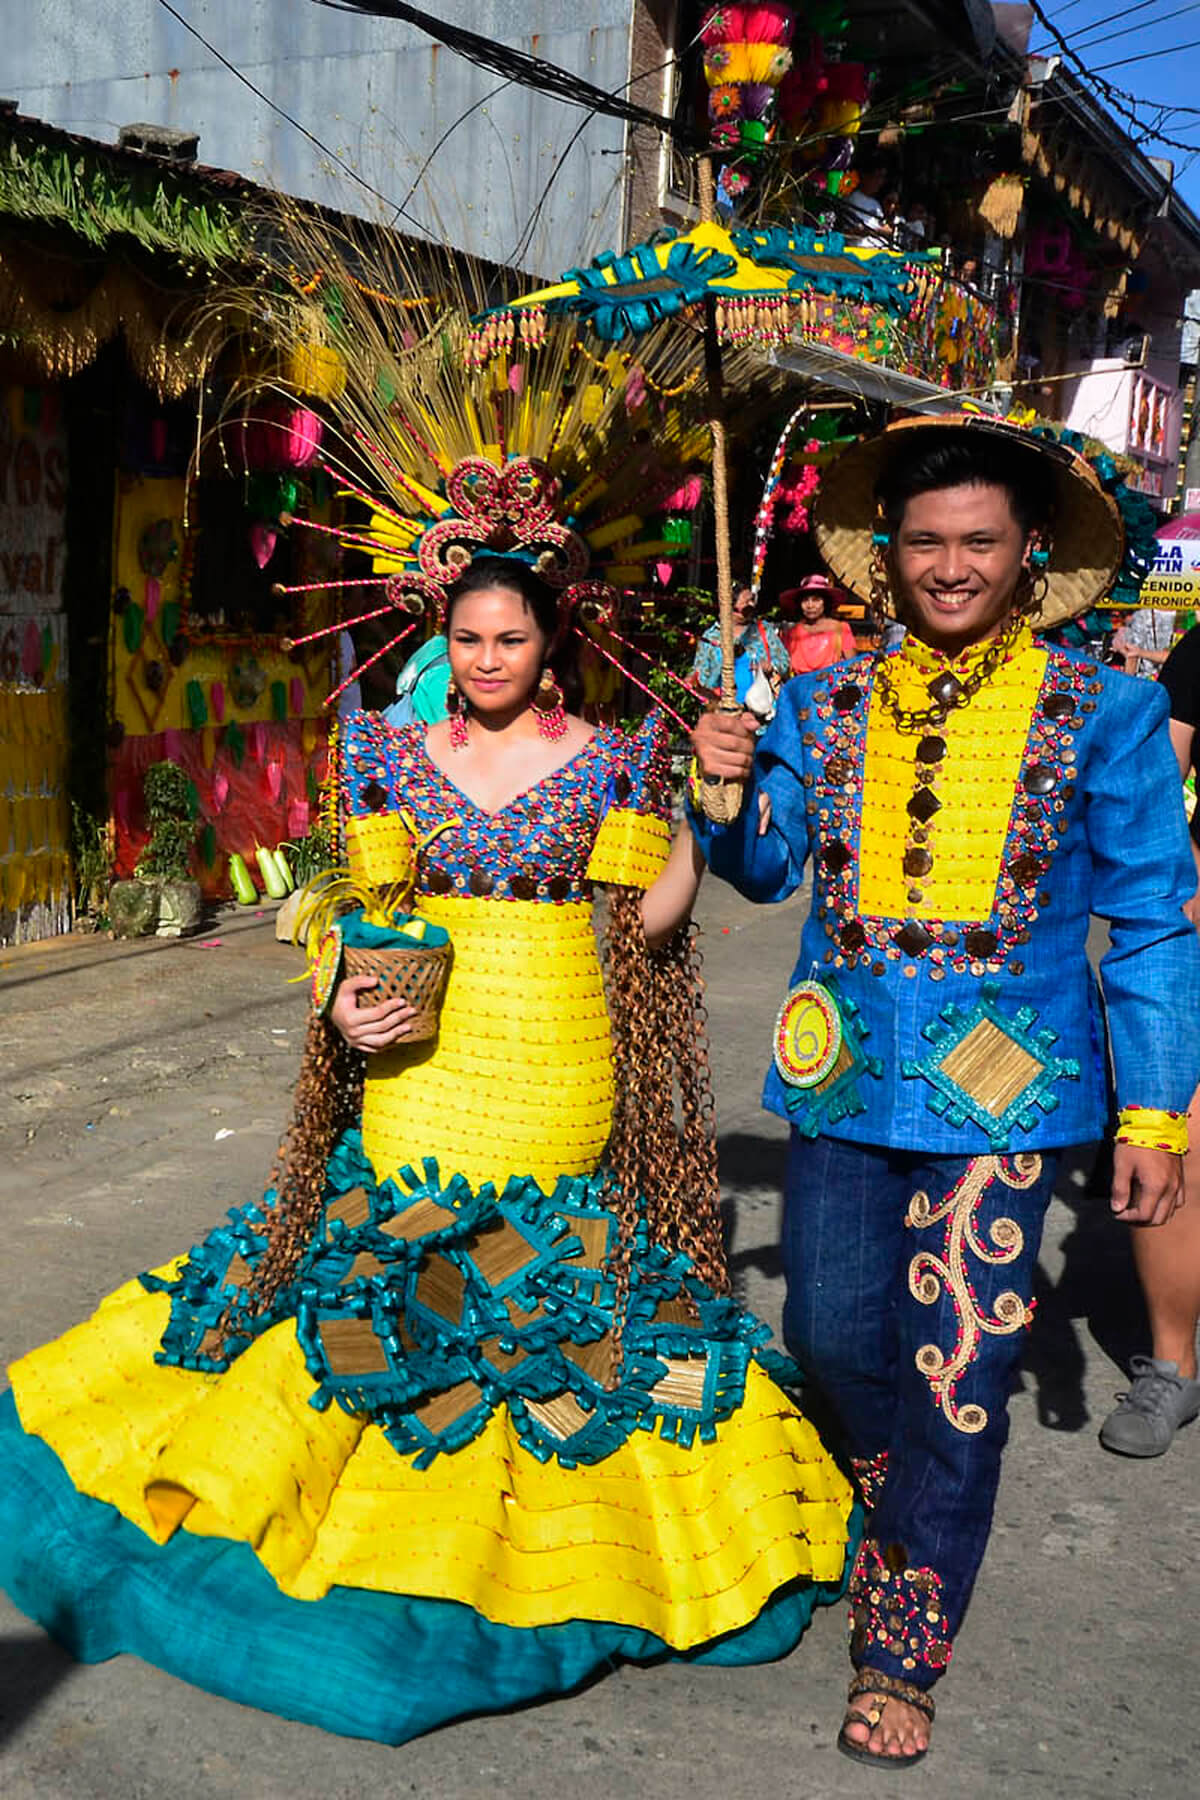 Pahiyas Festival in Lucban is one of the famous Philippine festivals